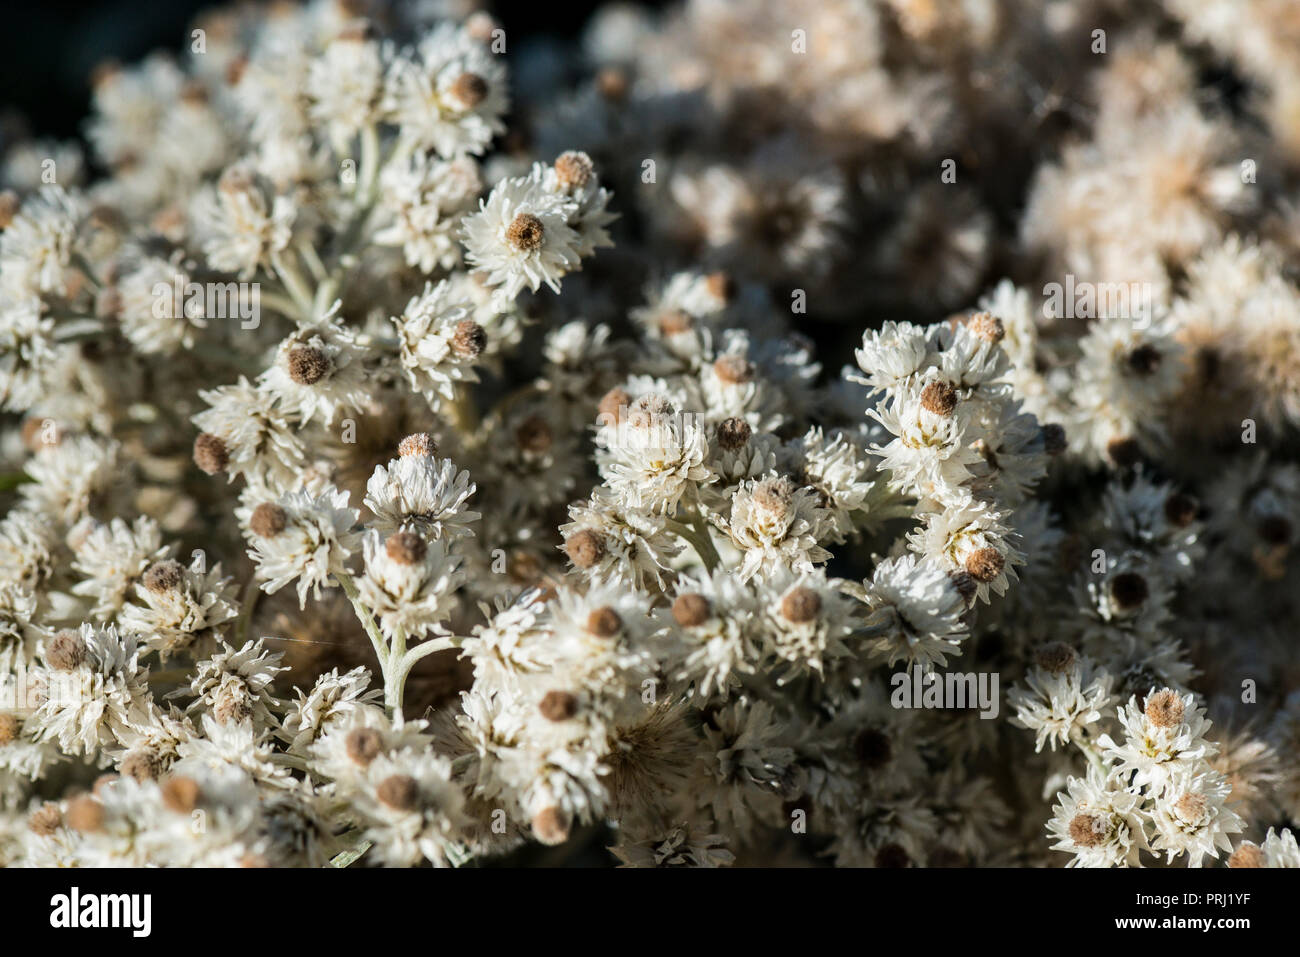 The gone over flowers of a triple-nerved pearly everlasting (Anaphalis triplinervis) Stock Photo